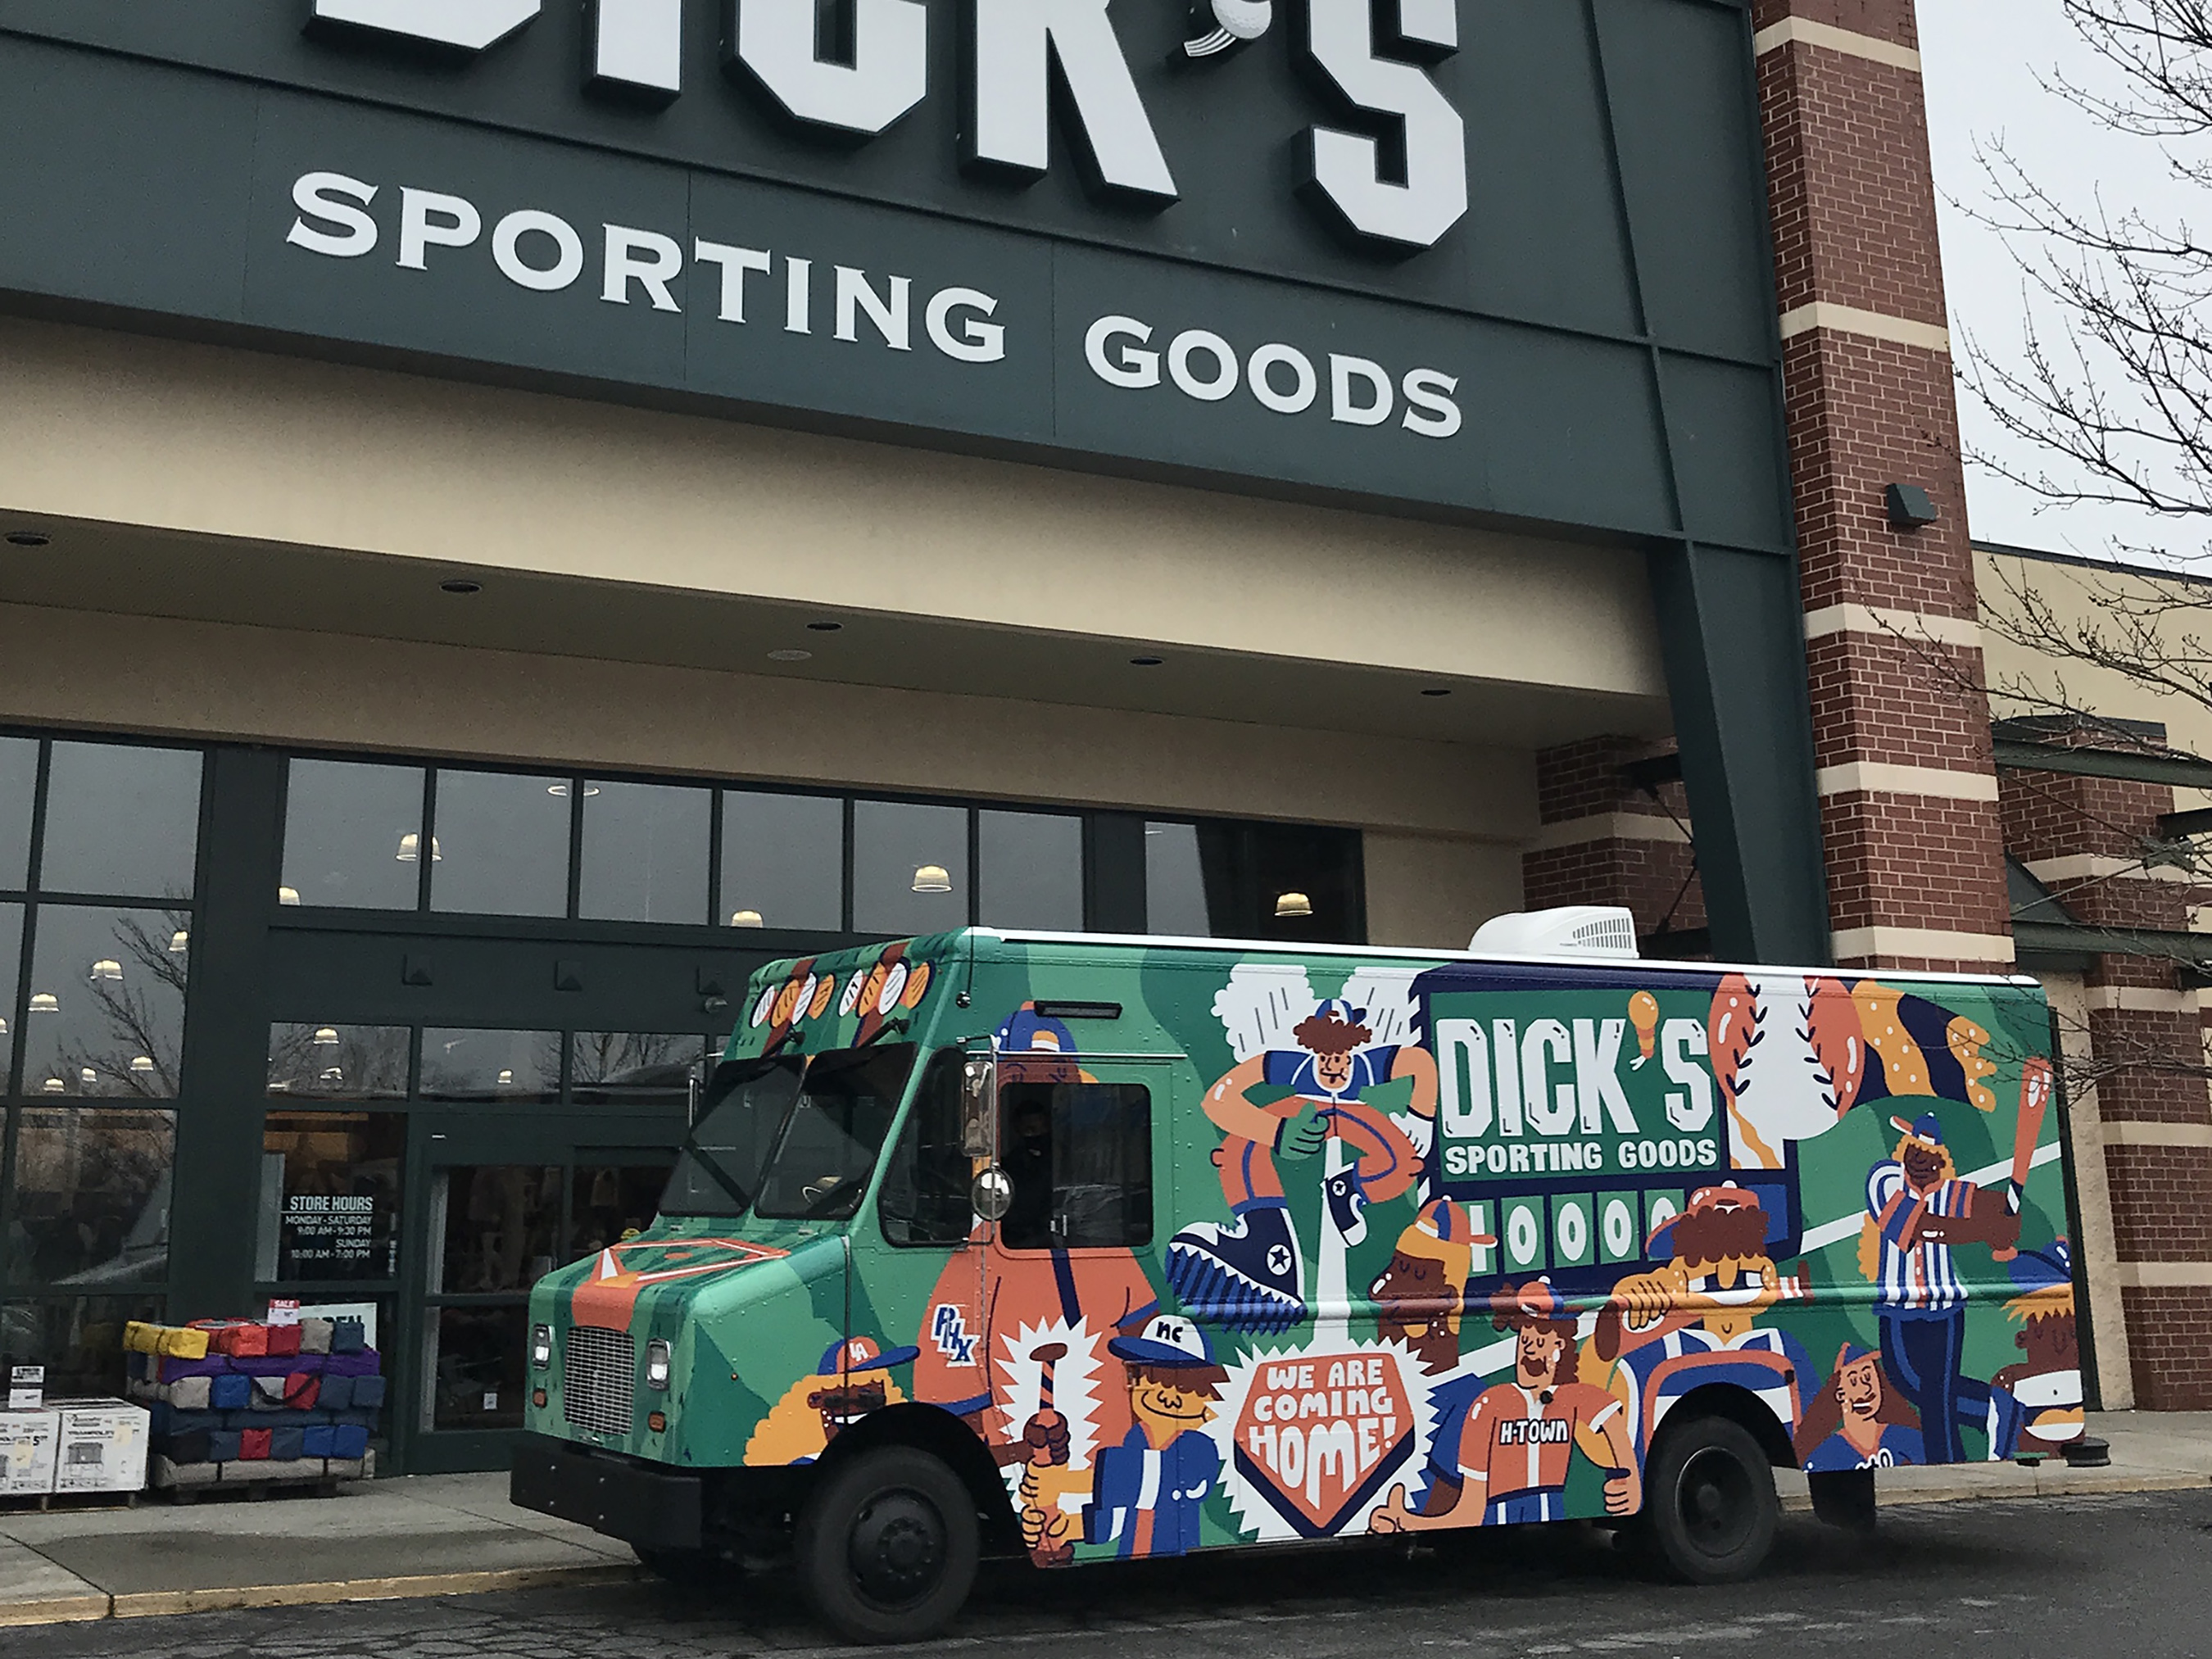 The DICK’S Sporting Goods truck parked in front of a DICK’S Sporting Goods store